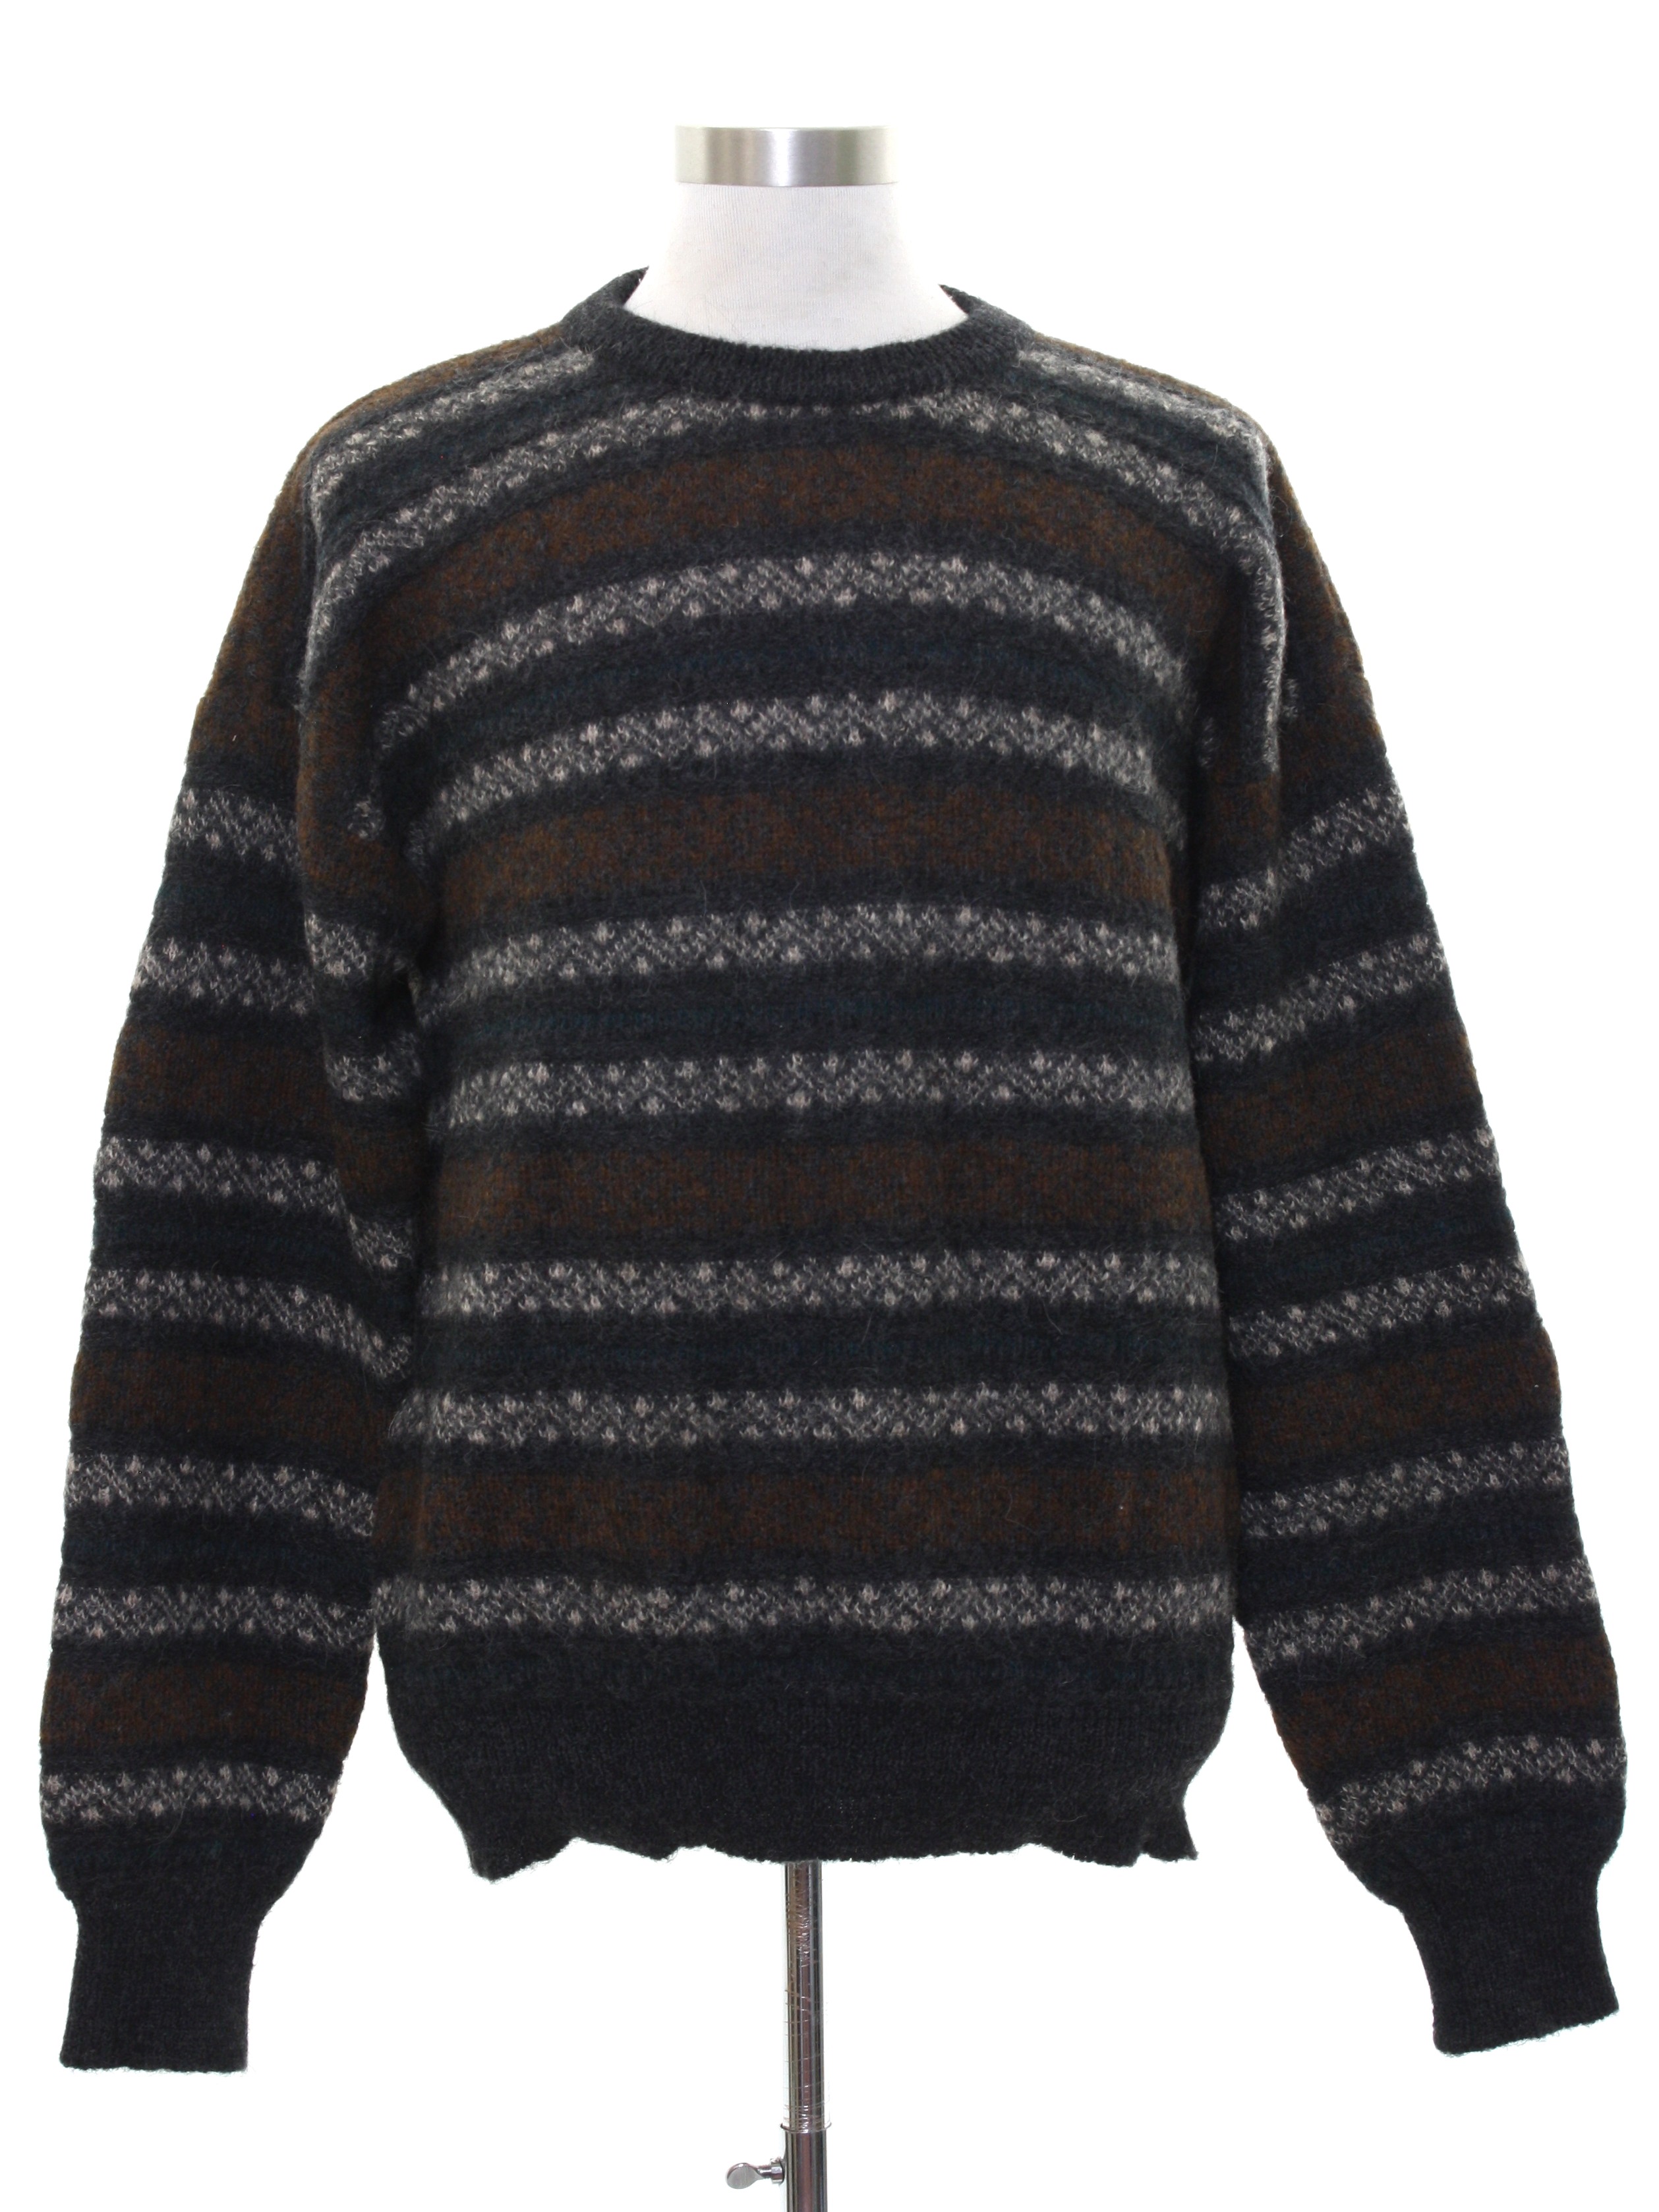 Vintage Top Knits 1980s Sweater: 80s -Top Knits- Mens charcoal ...